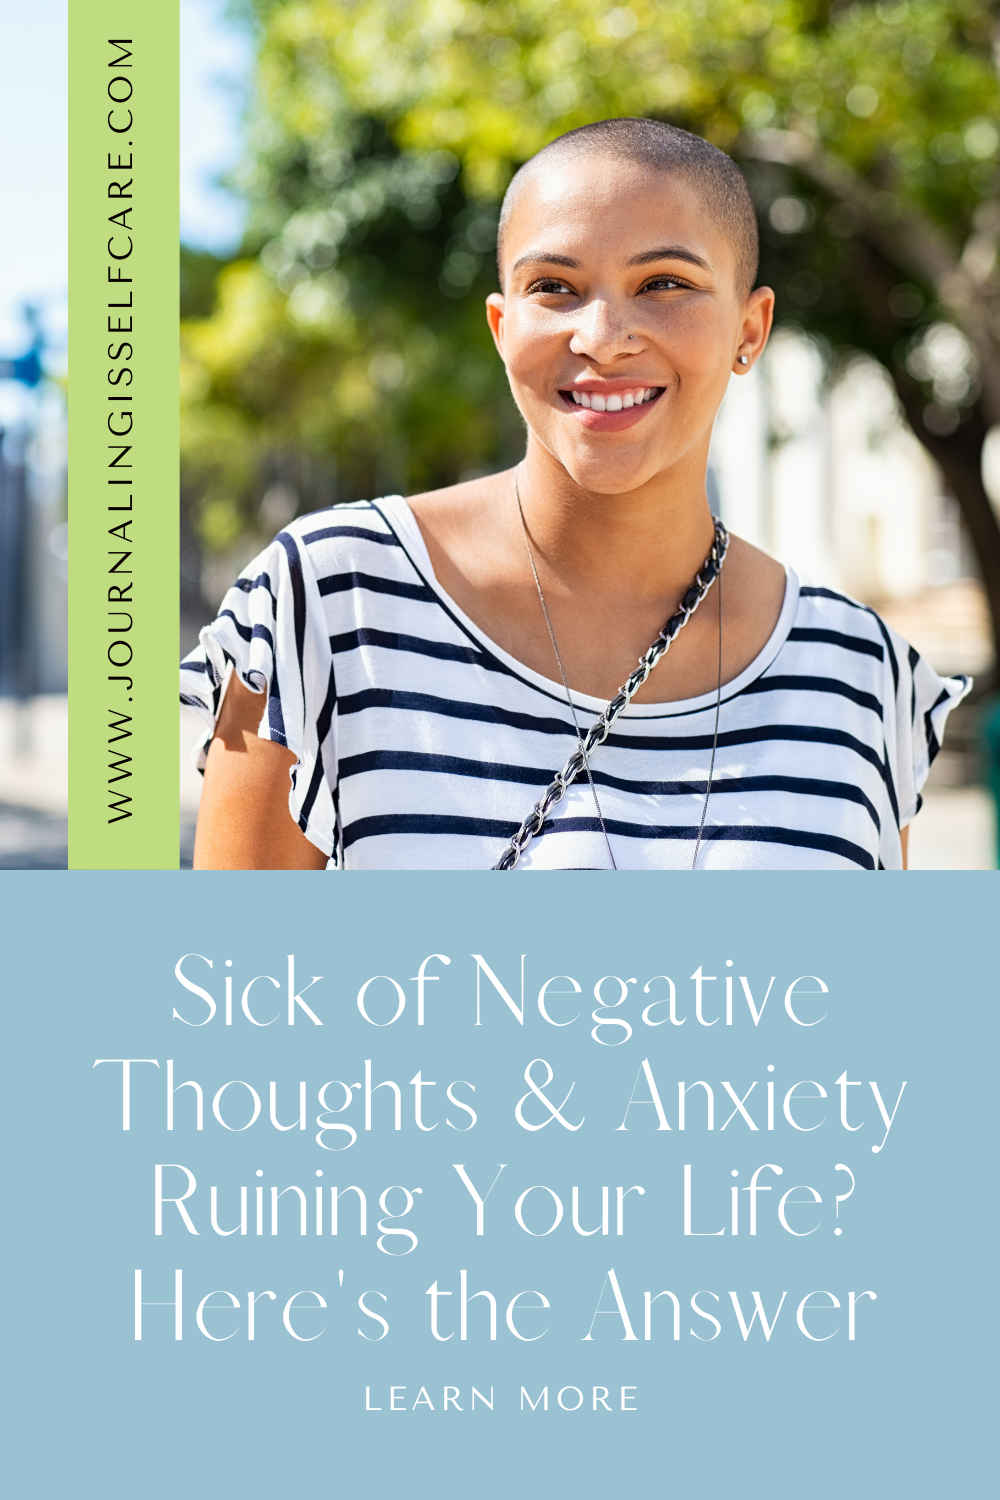 Sick of Negative Thoughts & Anxiety Ruining Your Life? Here's the Answer